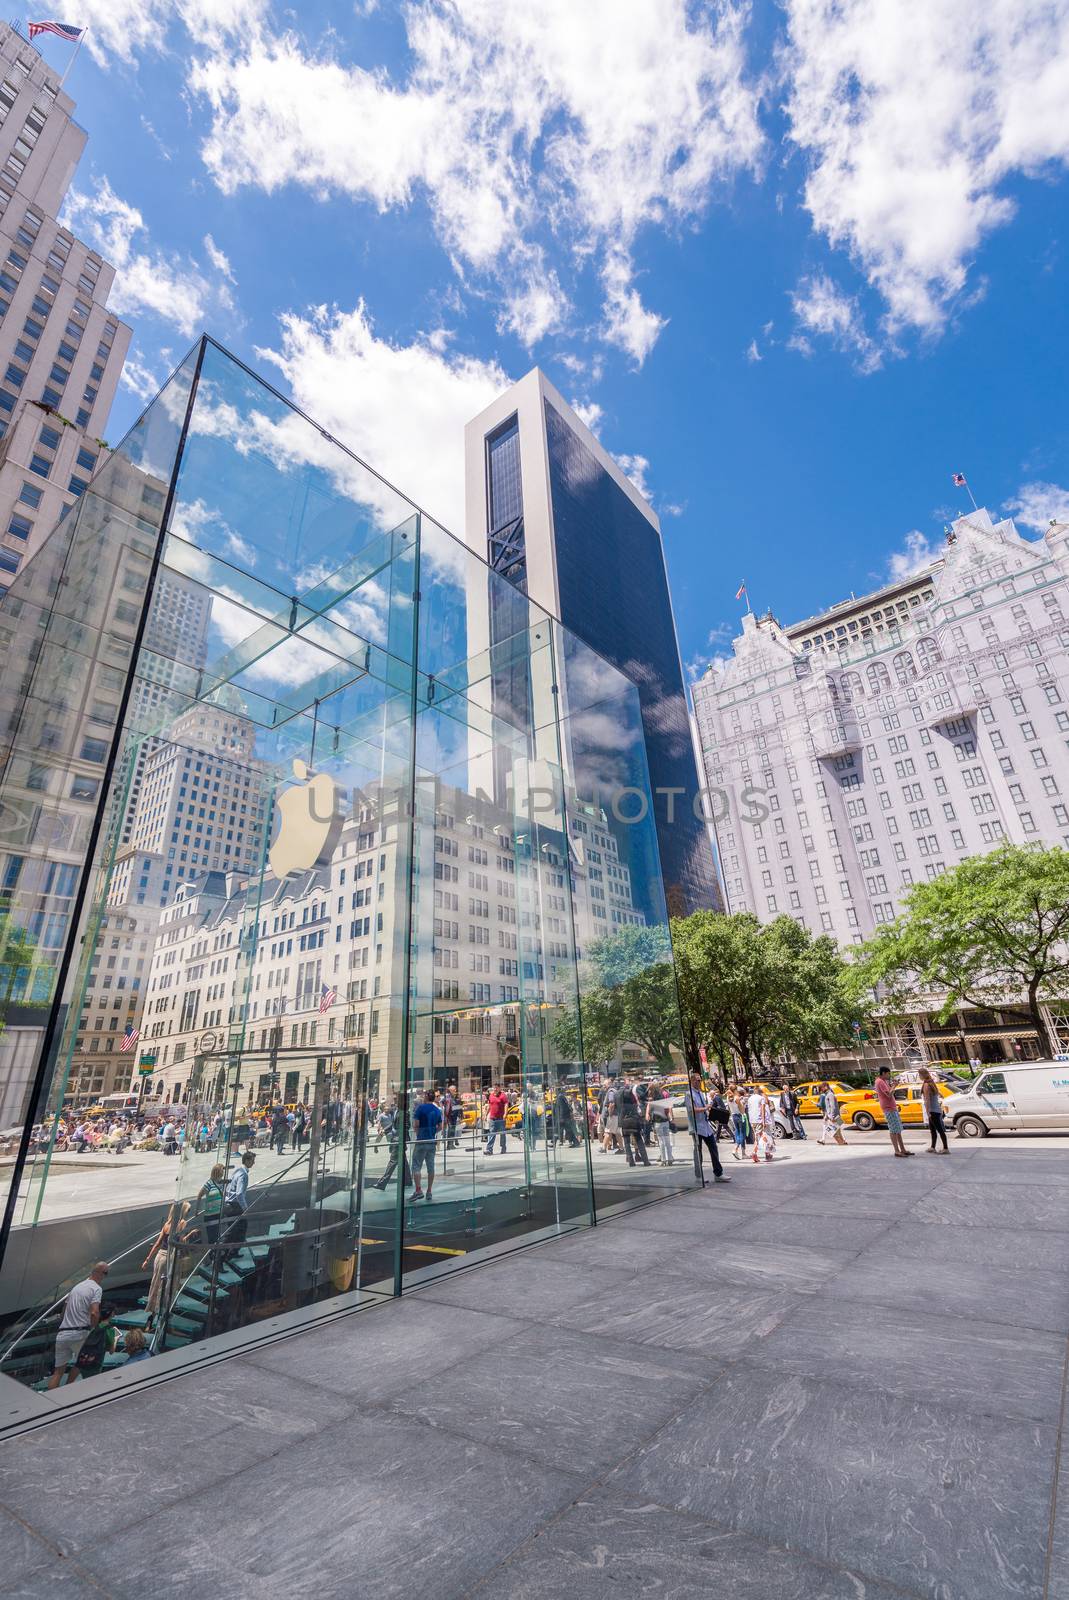 NEW YORK CITY - JUNE 12, 2013: Exterior view of Apple Store on t by jovannig